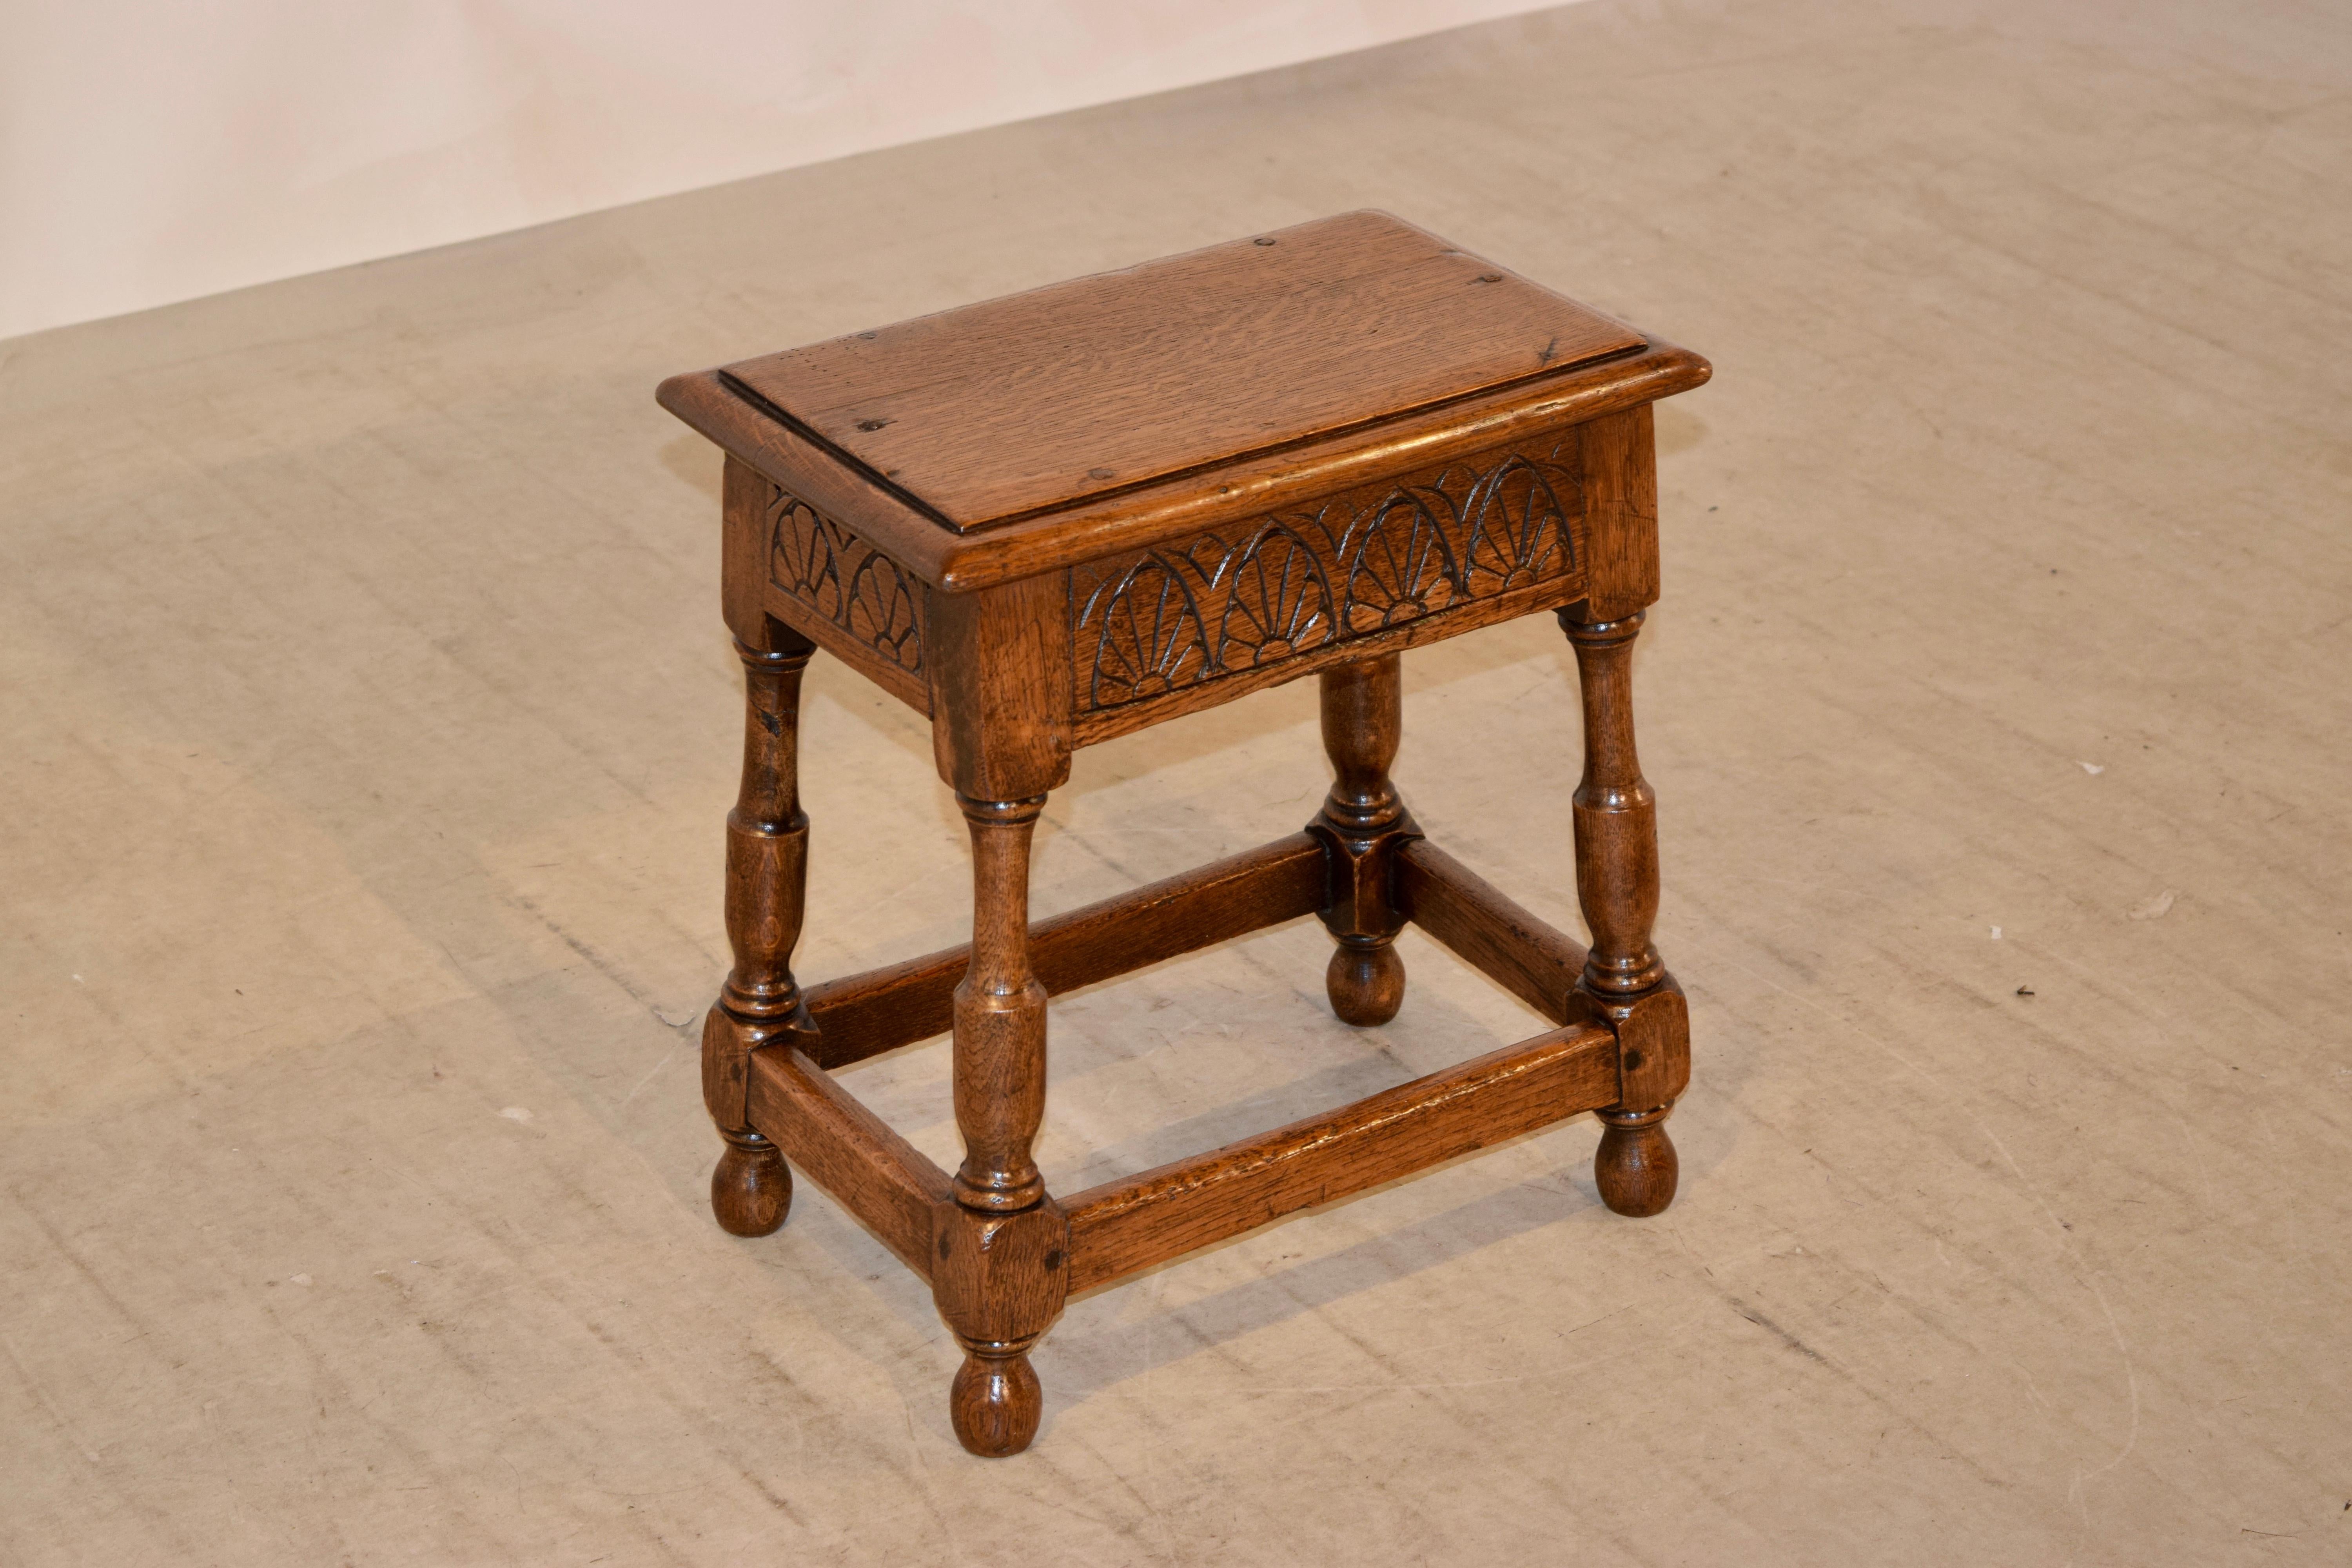 19th century English oak joint stool with a beveled edge around the top following down to hand carved aprons on all four sides for easy placement in any room. The legs are hand turned and splayed and are joined by simple stretchers. Supported on